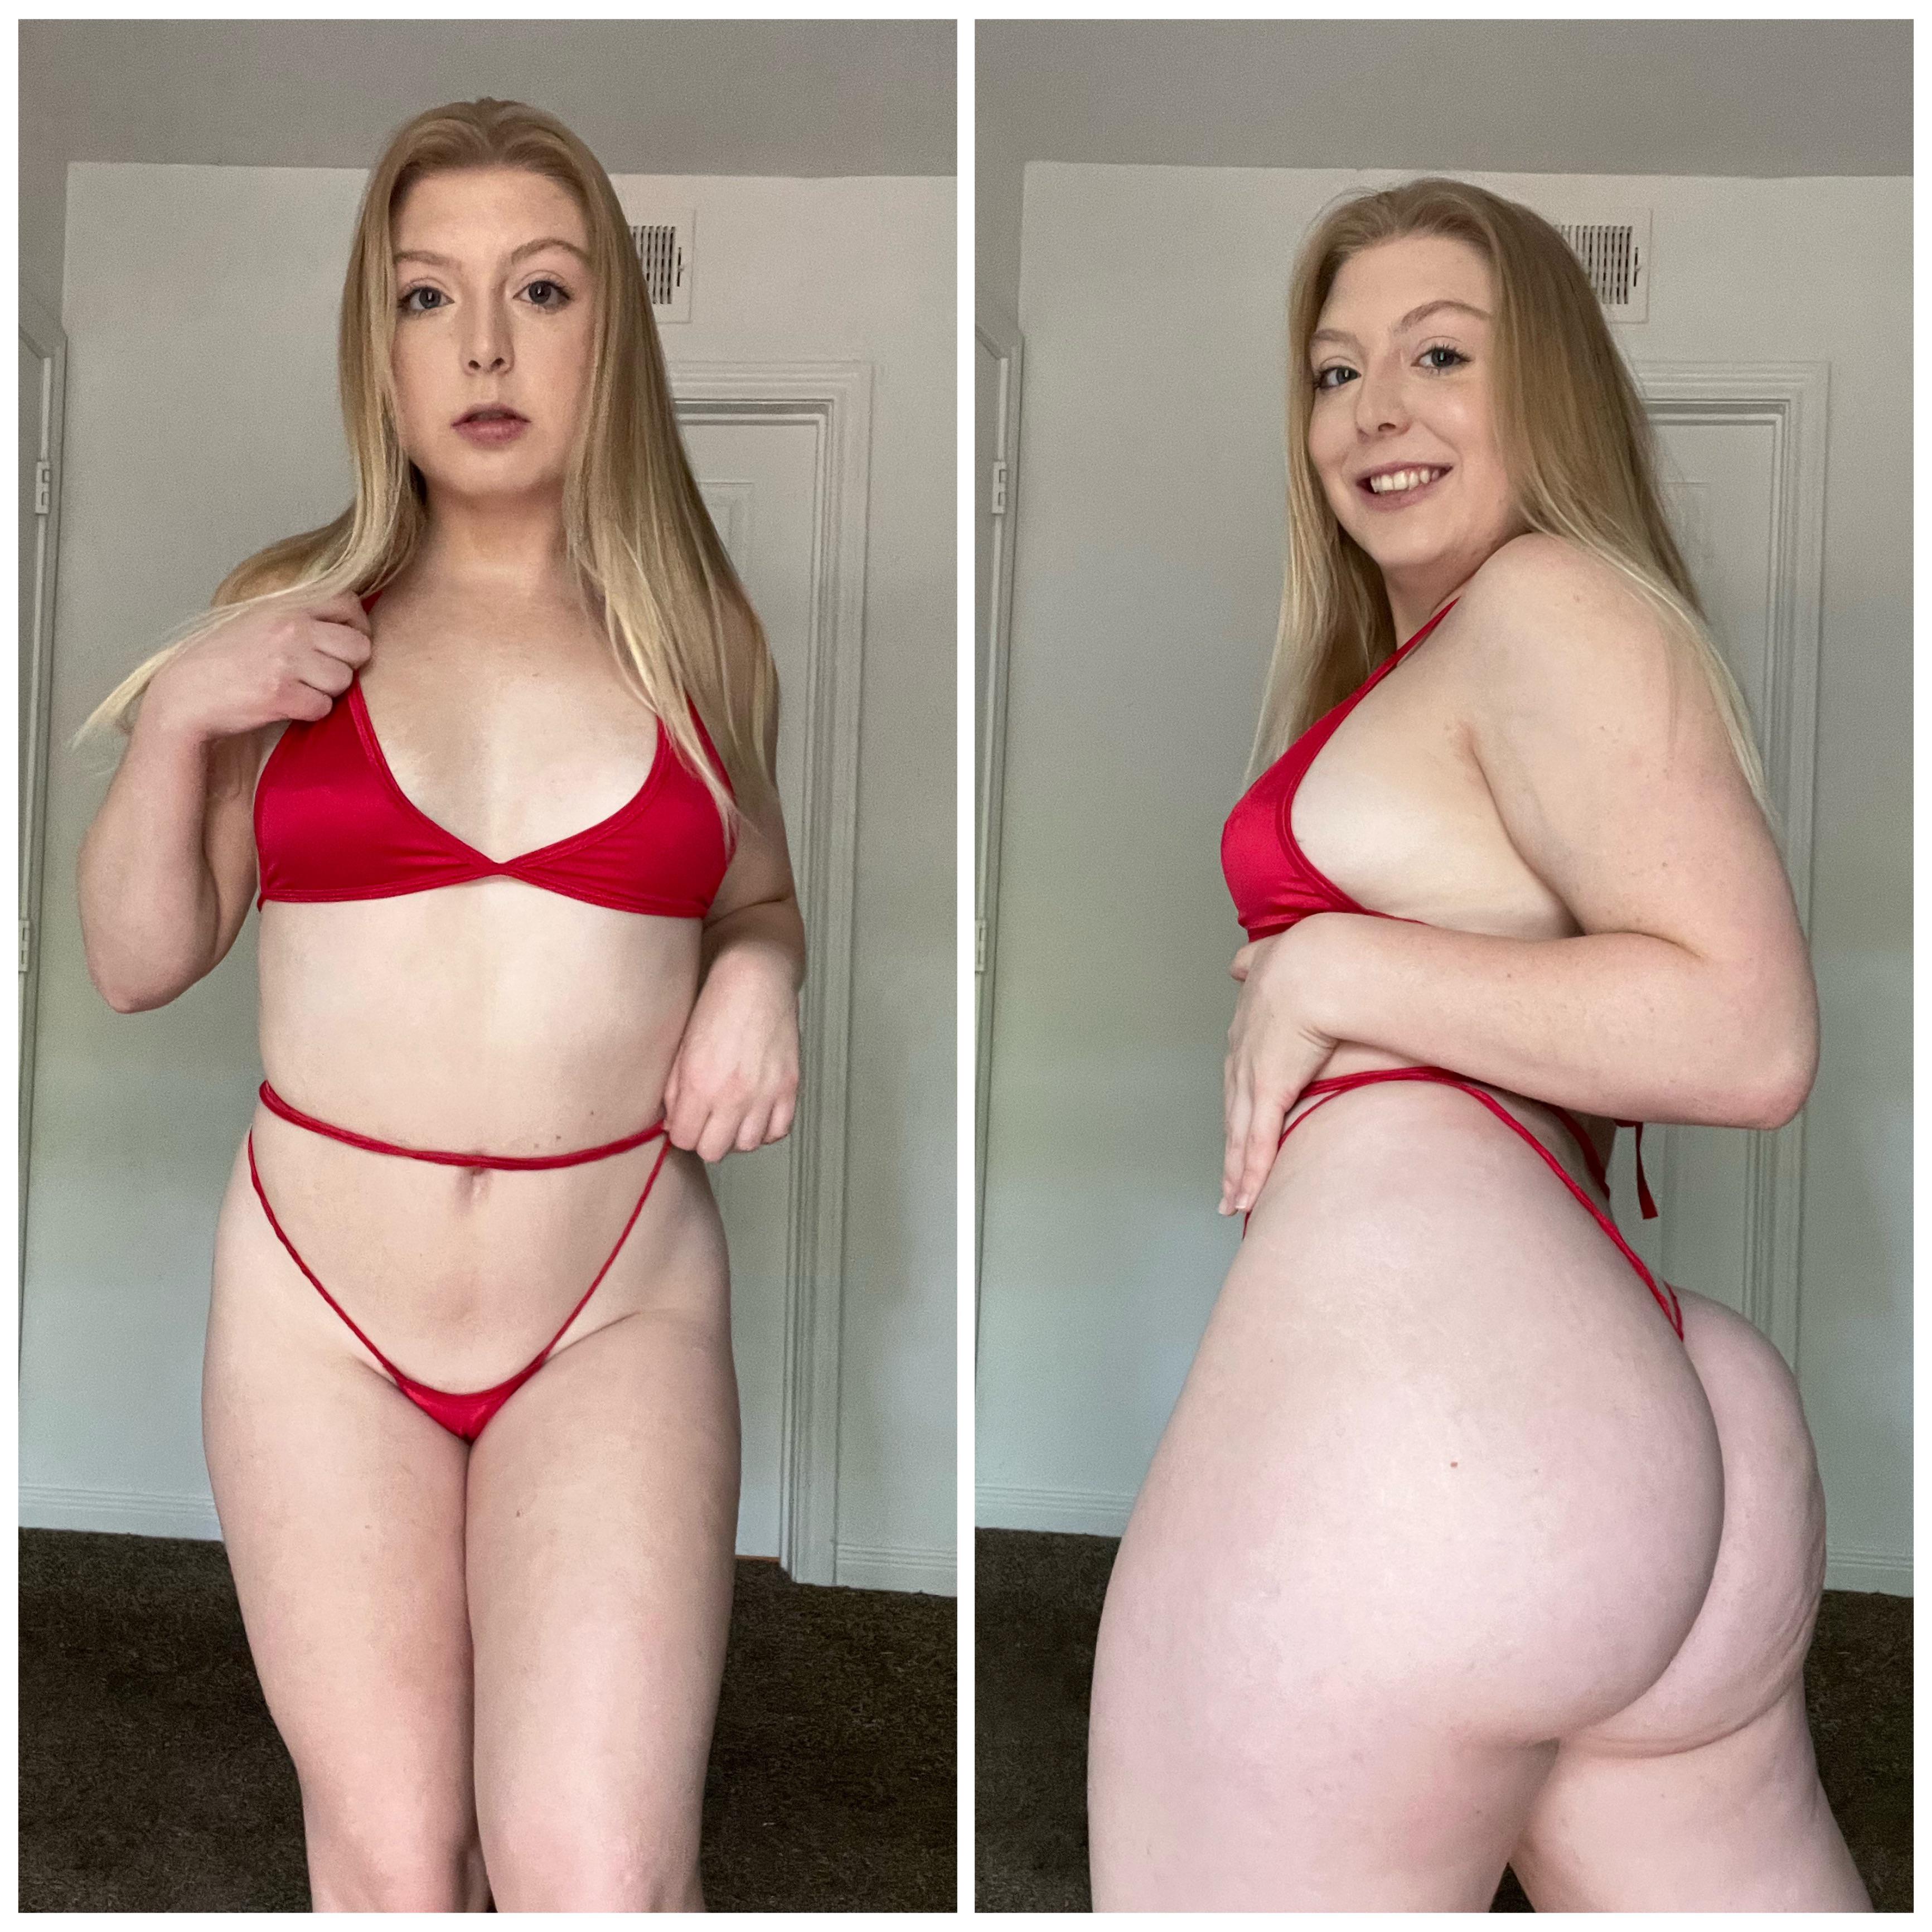 PAWG I surprise people with my ass every time I